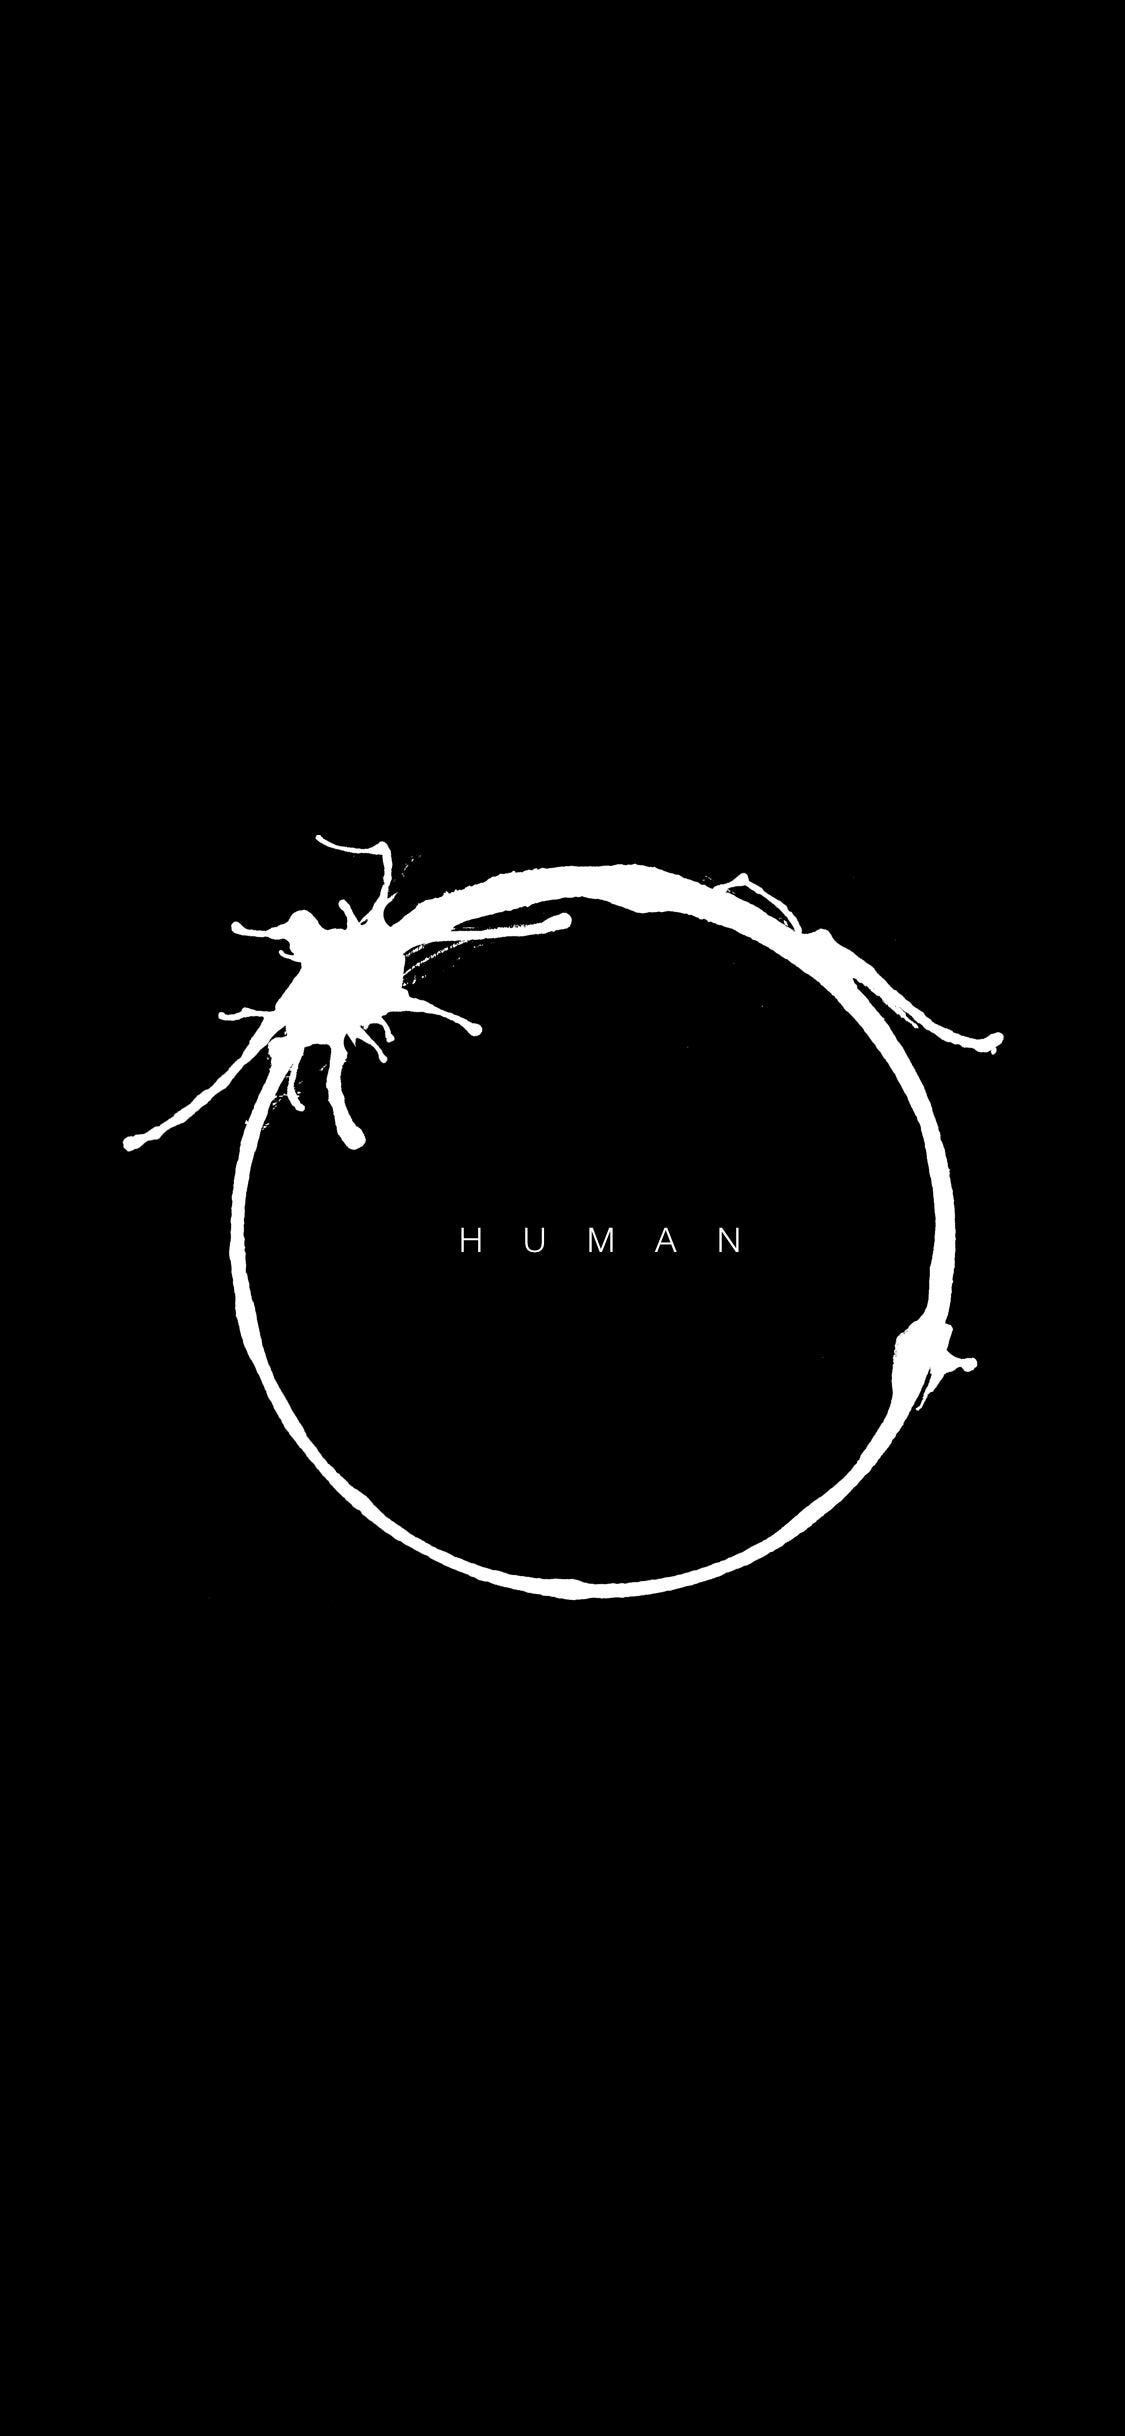 Human” logogram from “Arrival” movie (1125x2436)